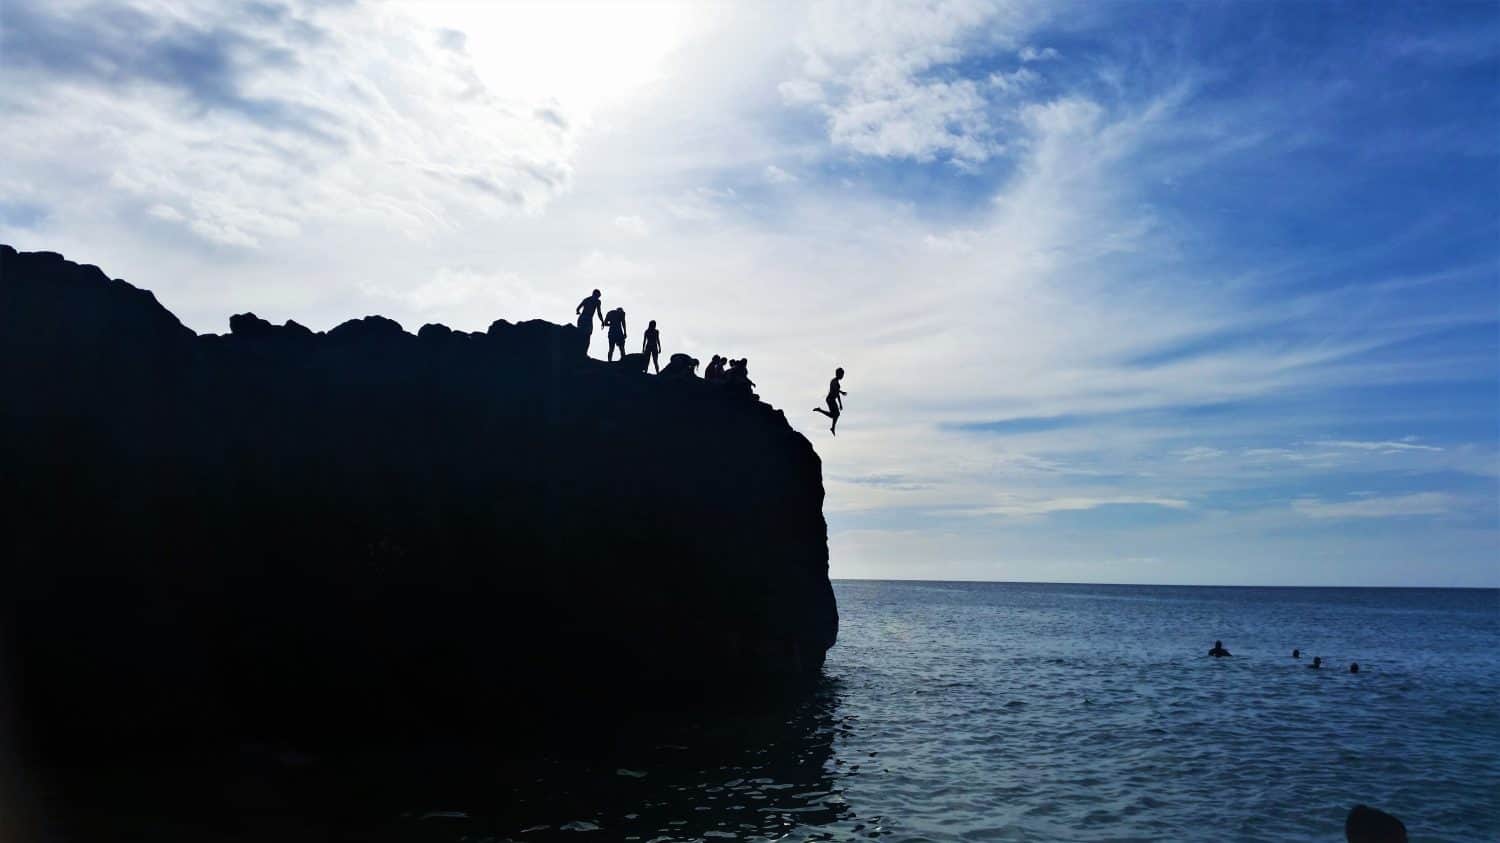 Kids cliff jumping into the ocean at sunset in summer at Waimea Bay beach, Oahu, Hawaii. A popular activity for many kids and tourists alike!